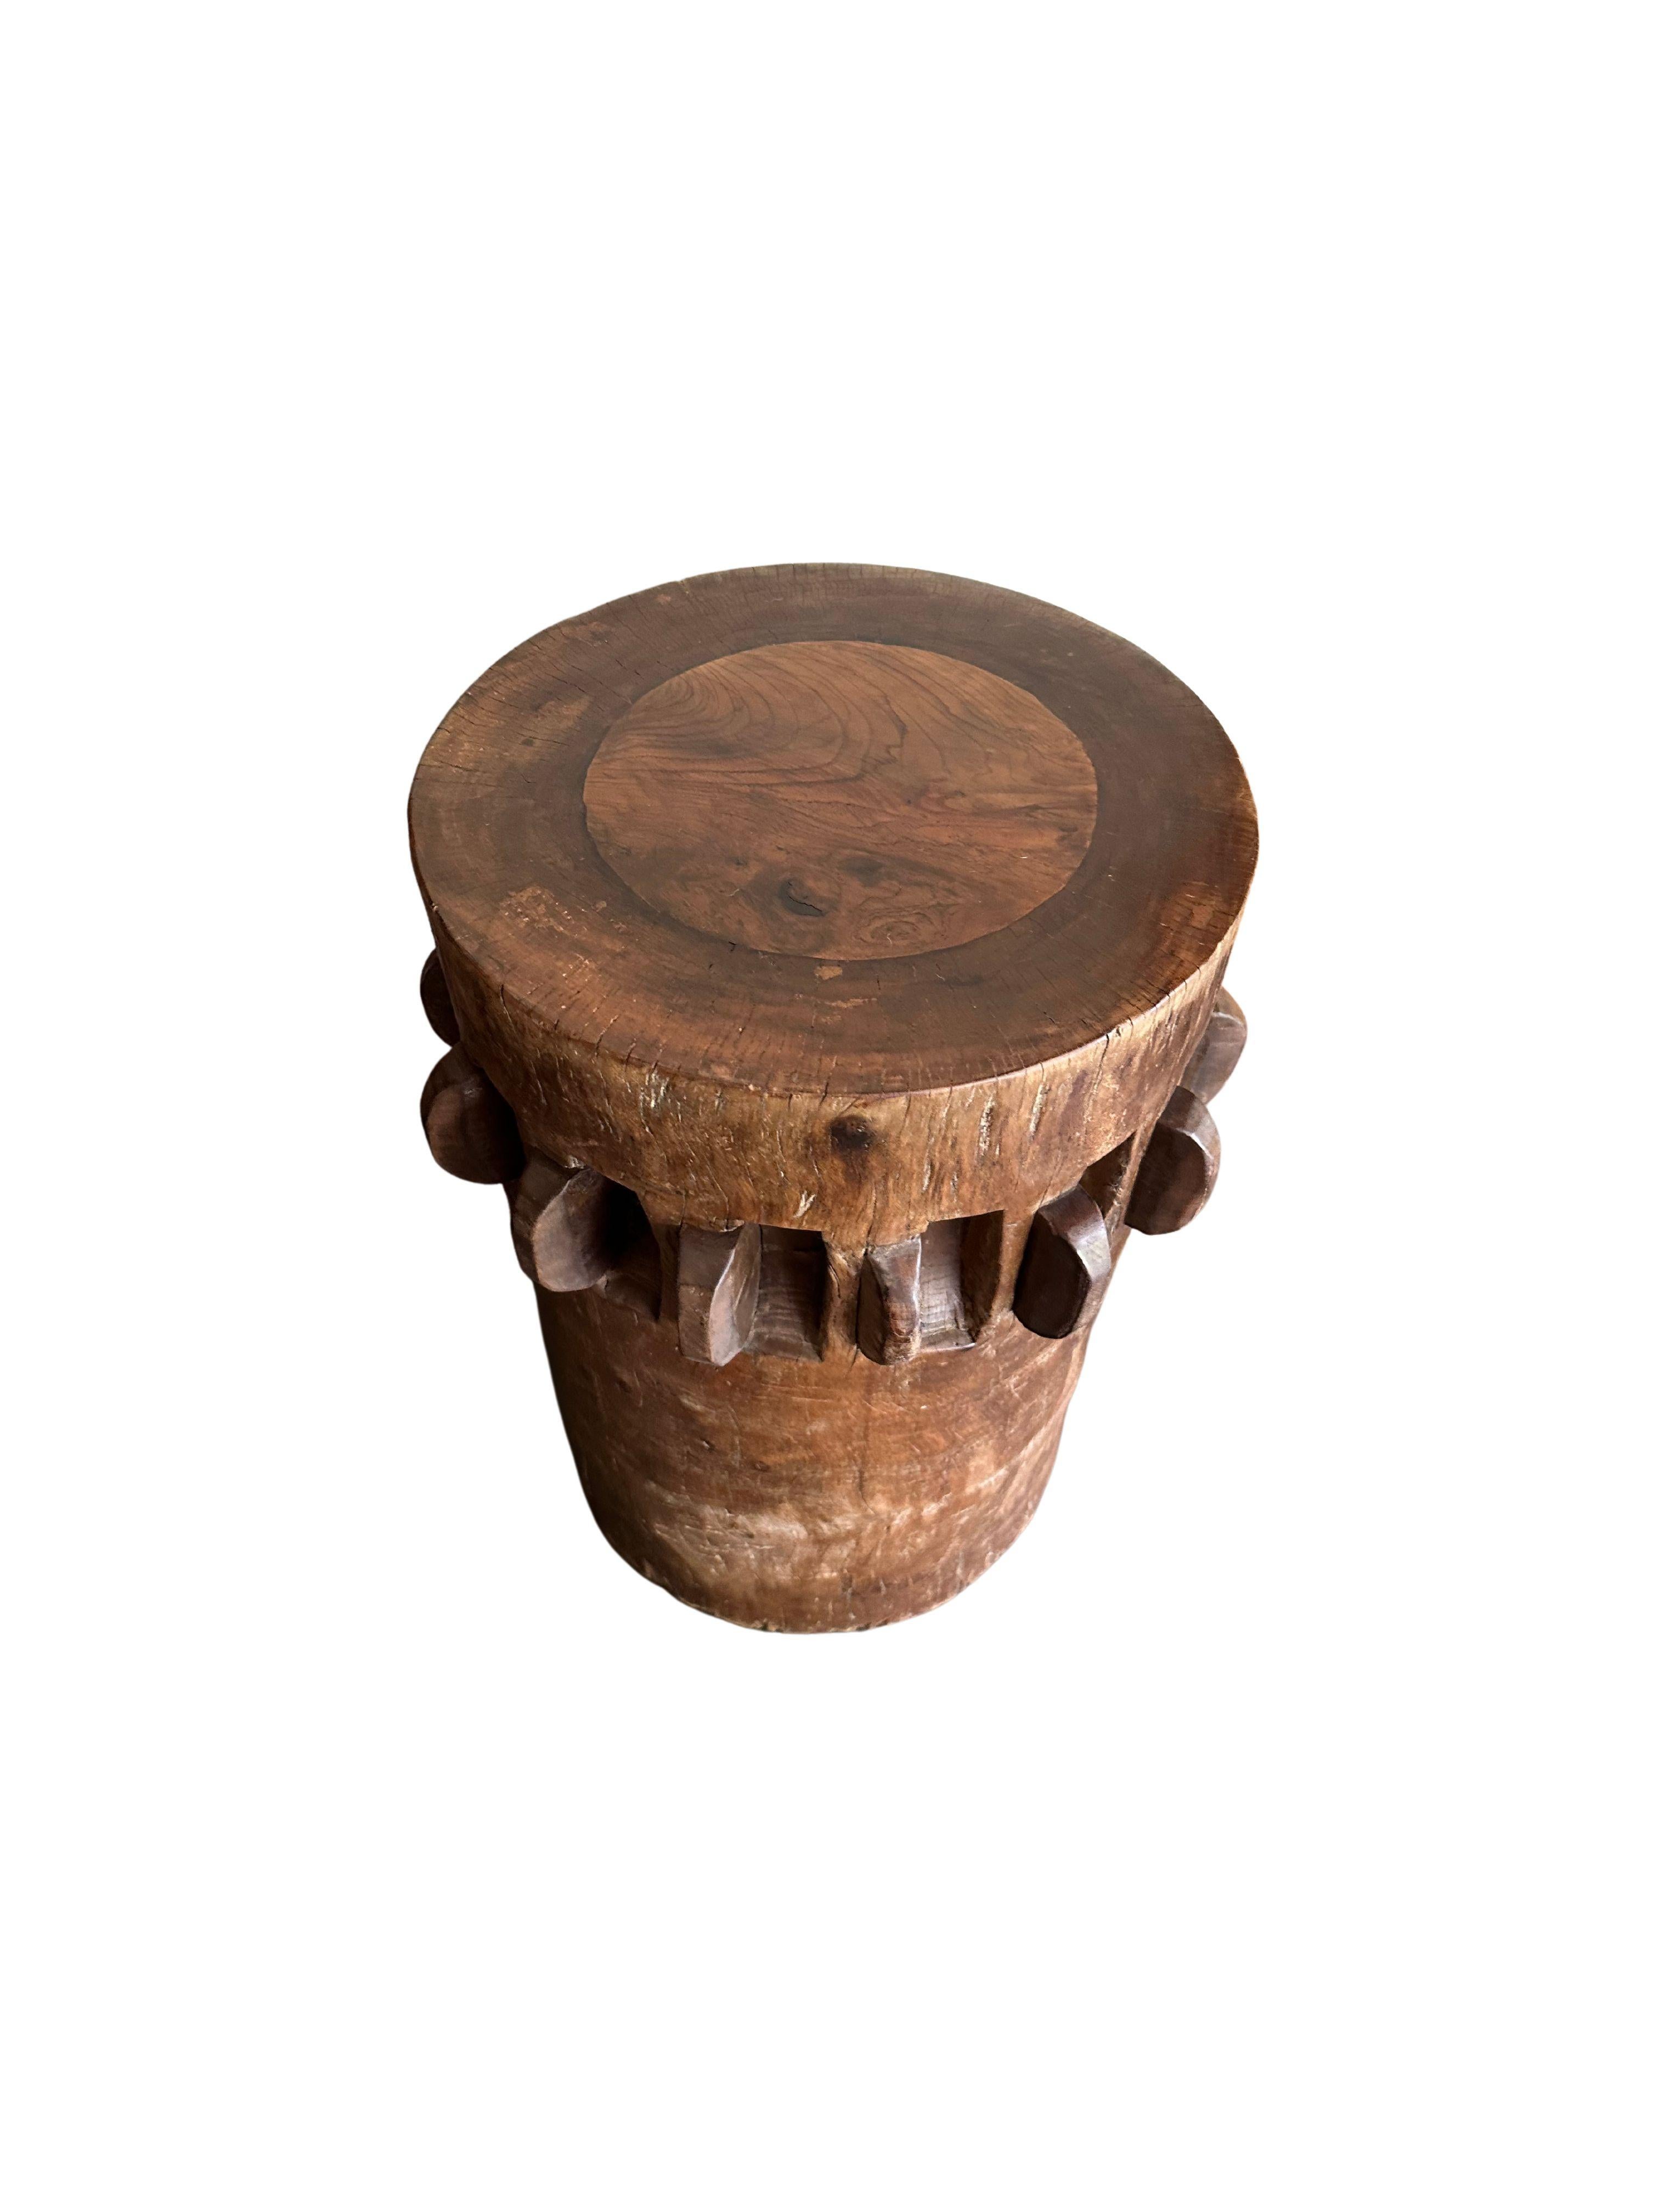 Hand-Crafted Solid Teak Sugar Cane Crusher / Grinder from Java, Indonesia c. 1950